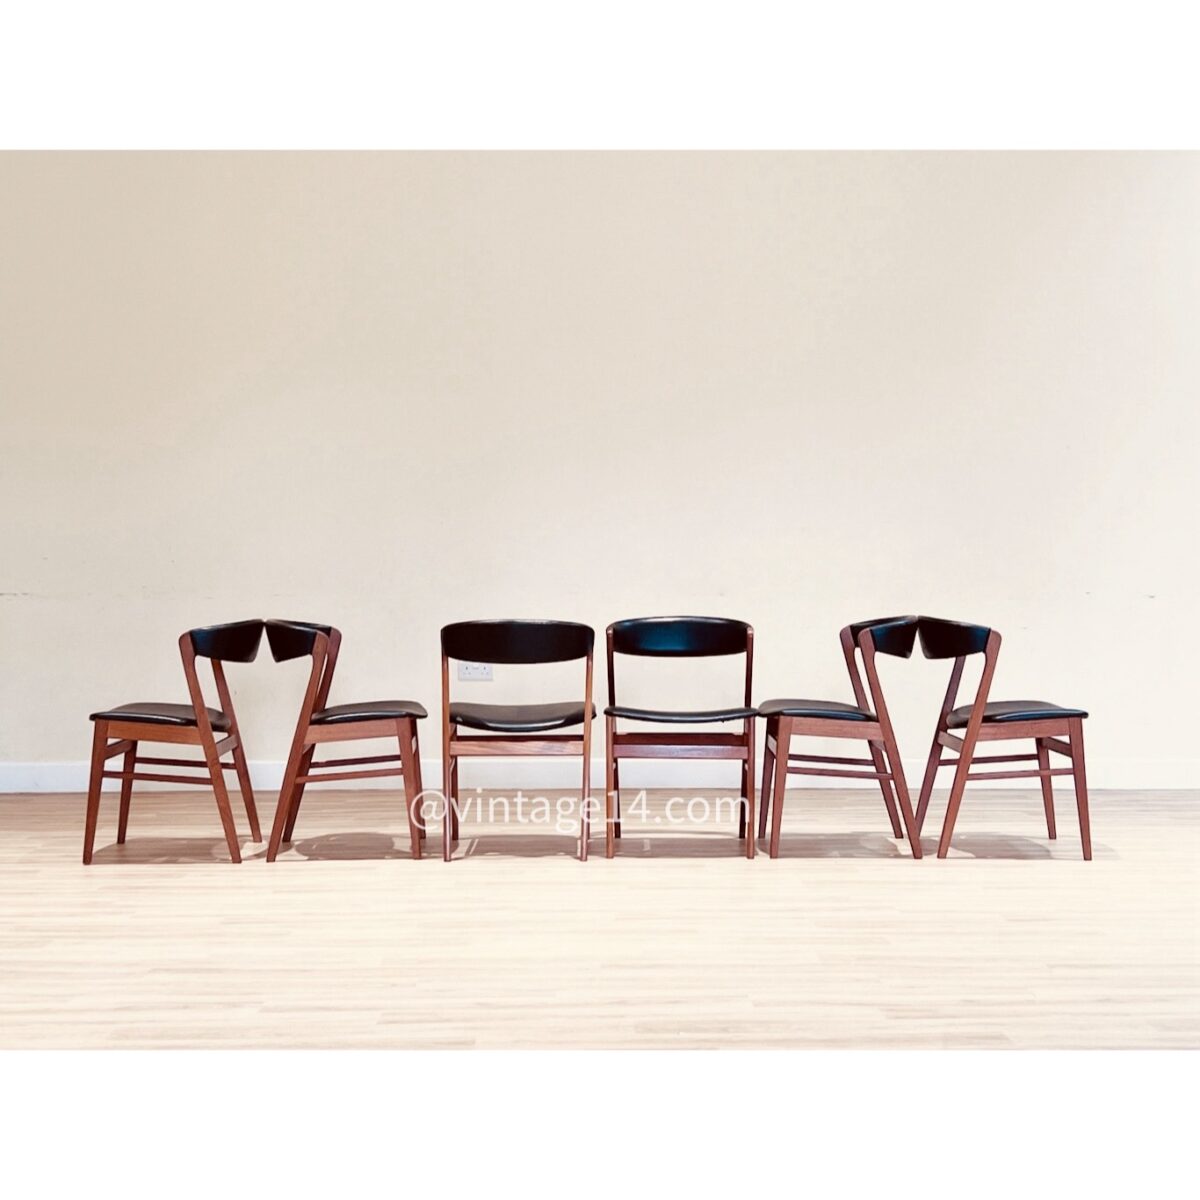 Danish Dining Chairs In Teak By Sax